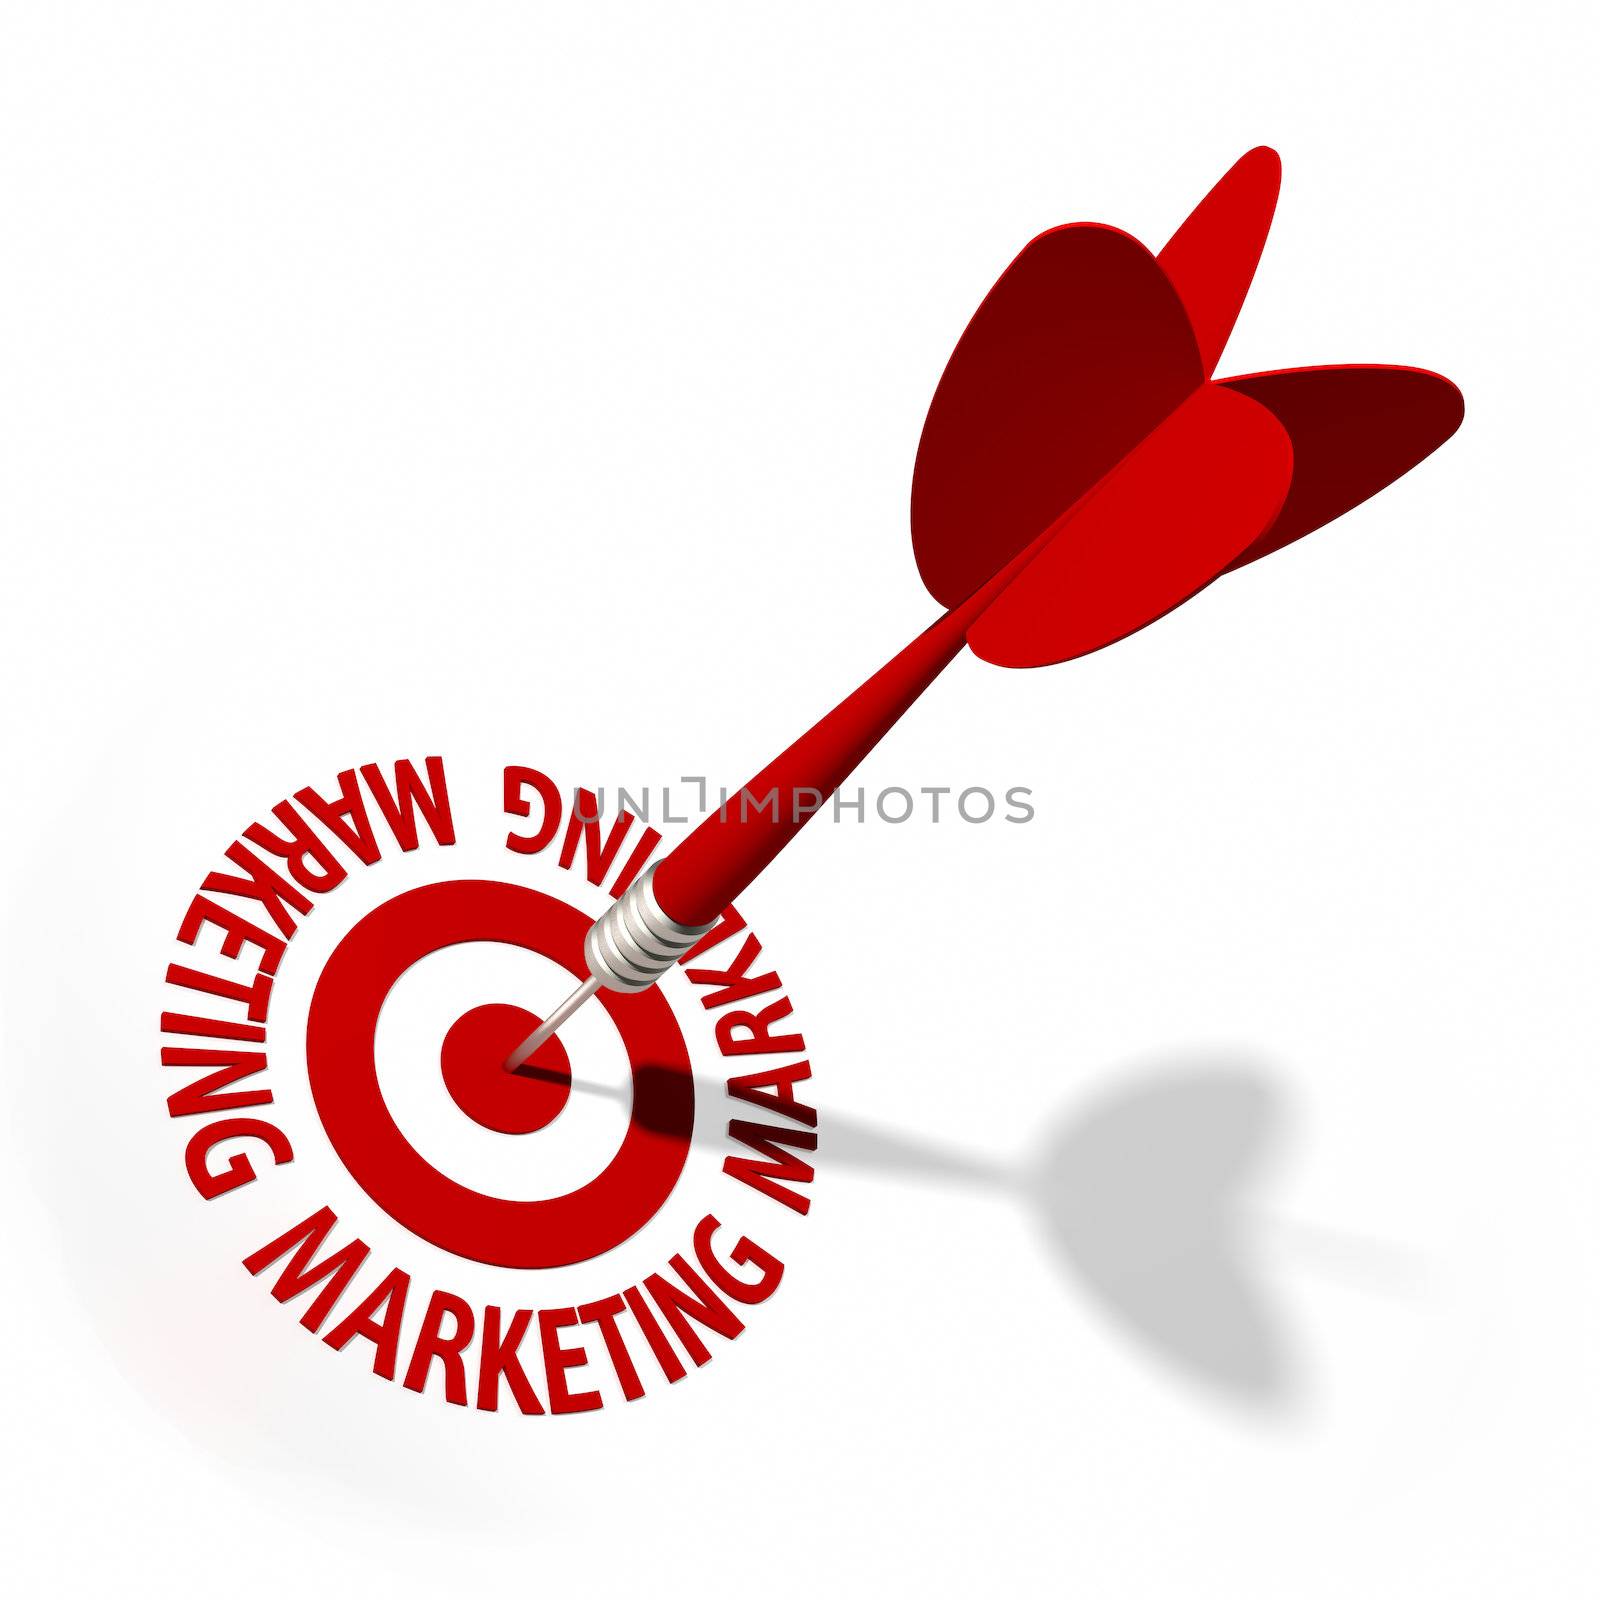 Marketing Target by OutStyle